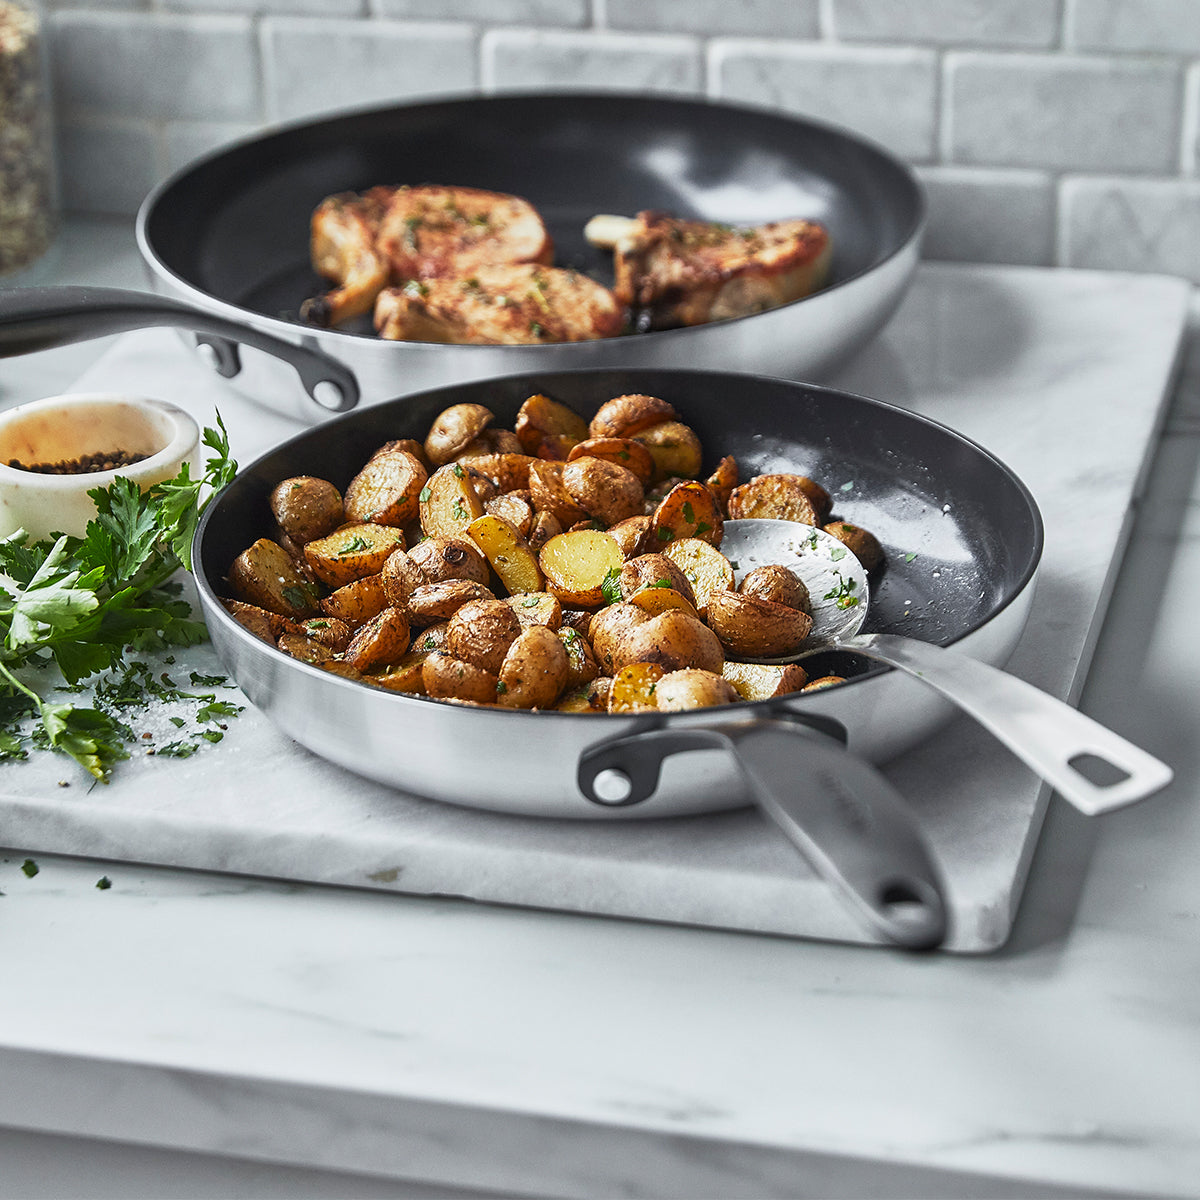 GreenLife Soft Grip Healthy Ceramic Nonstick 7 and 10 Frying Pan Skillet Set, PFAS-Free, Dishwasher Safe, Gray